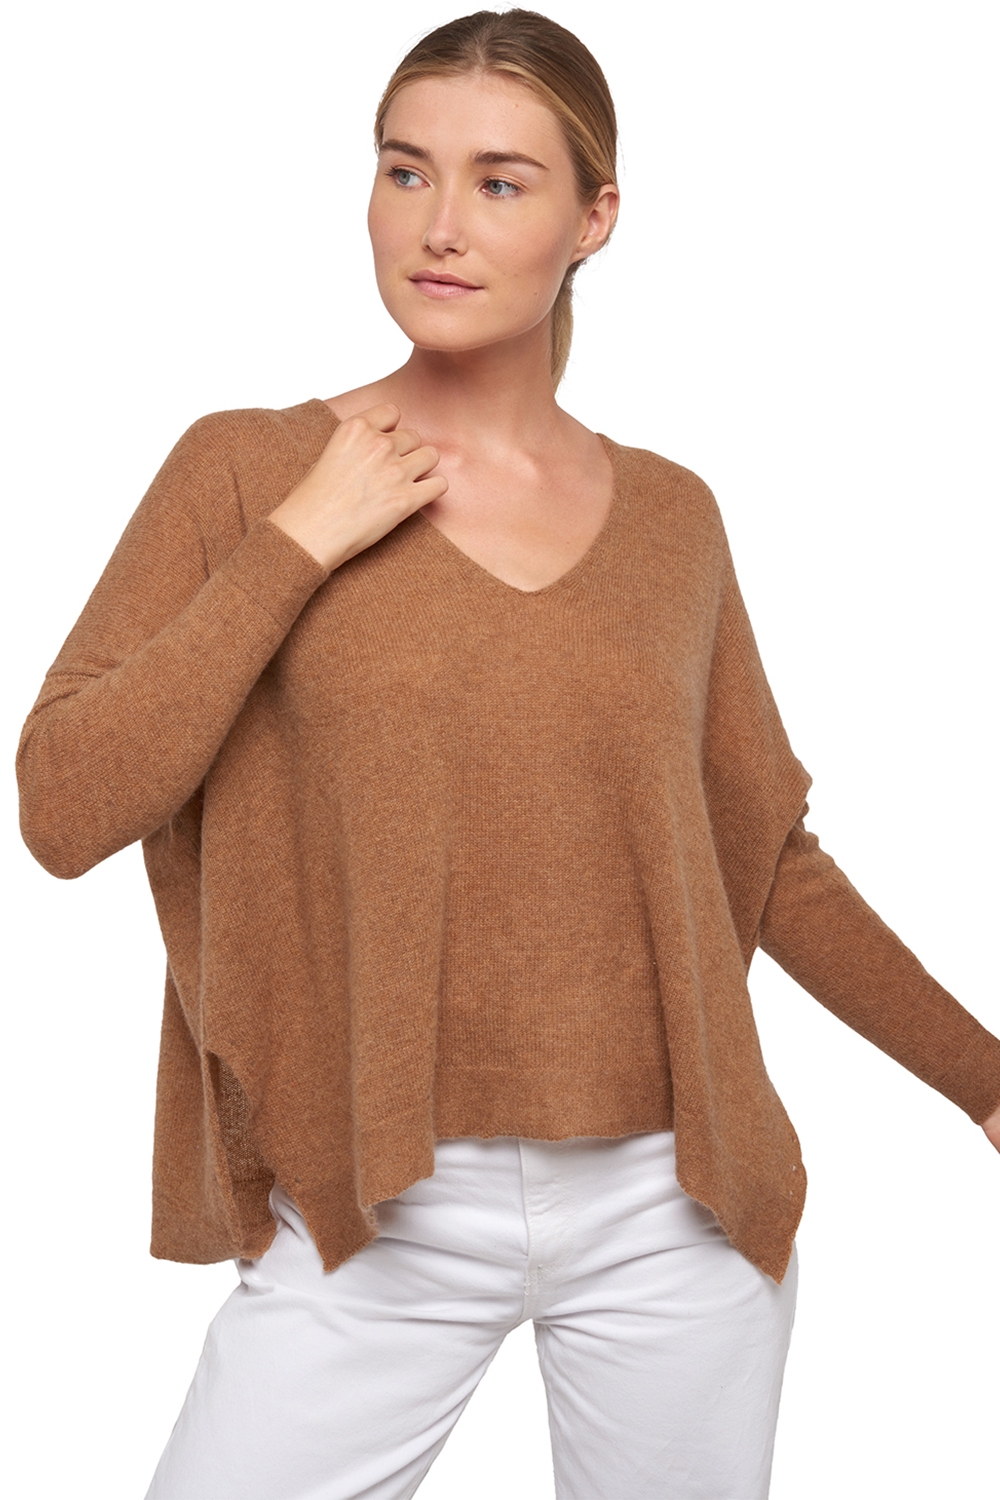 Cachemire pull femme biscarrosse camel chine t1